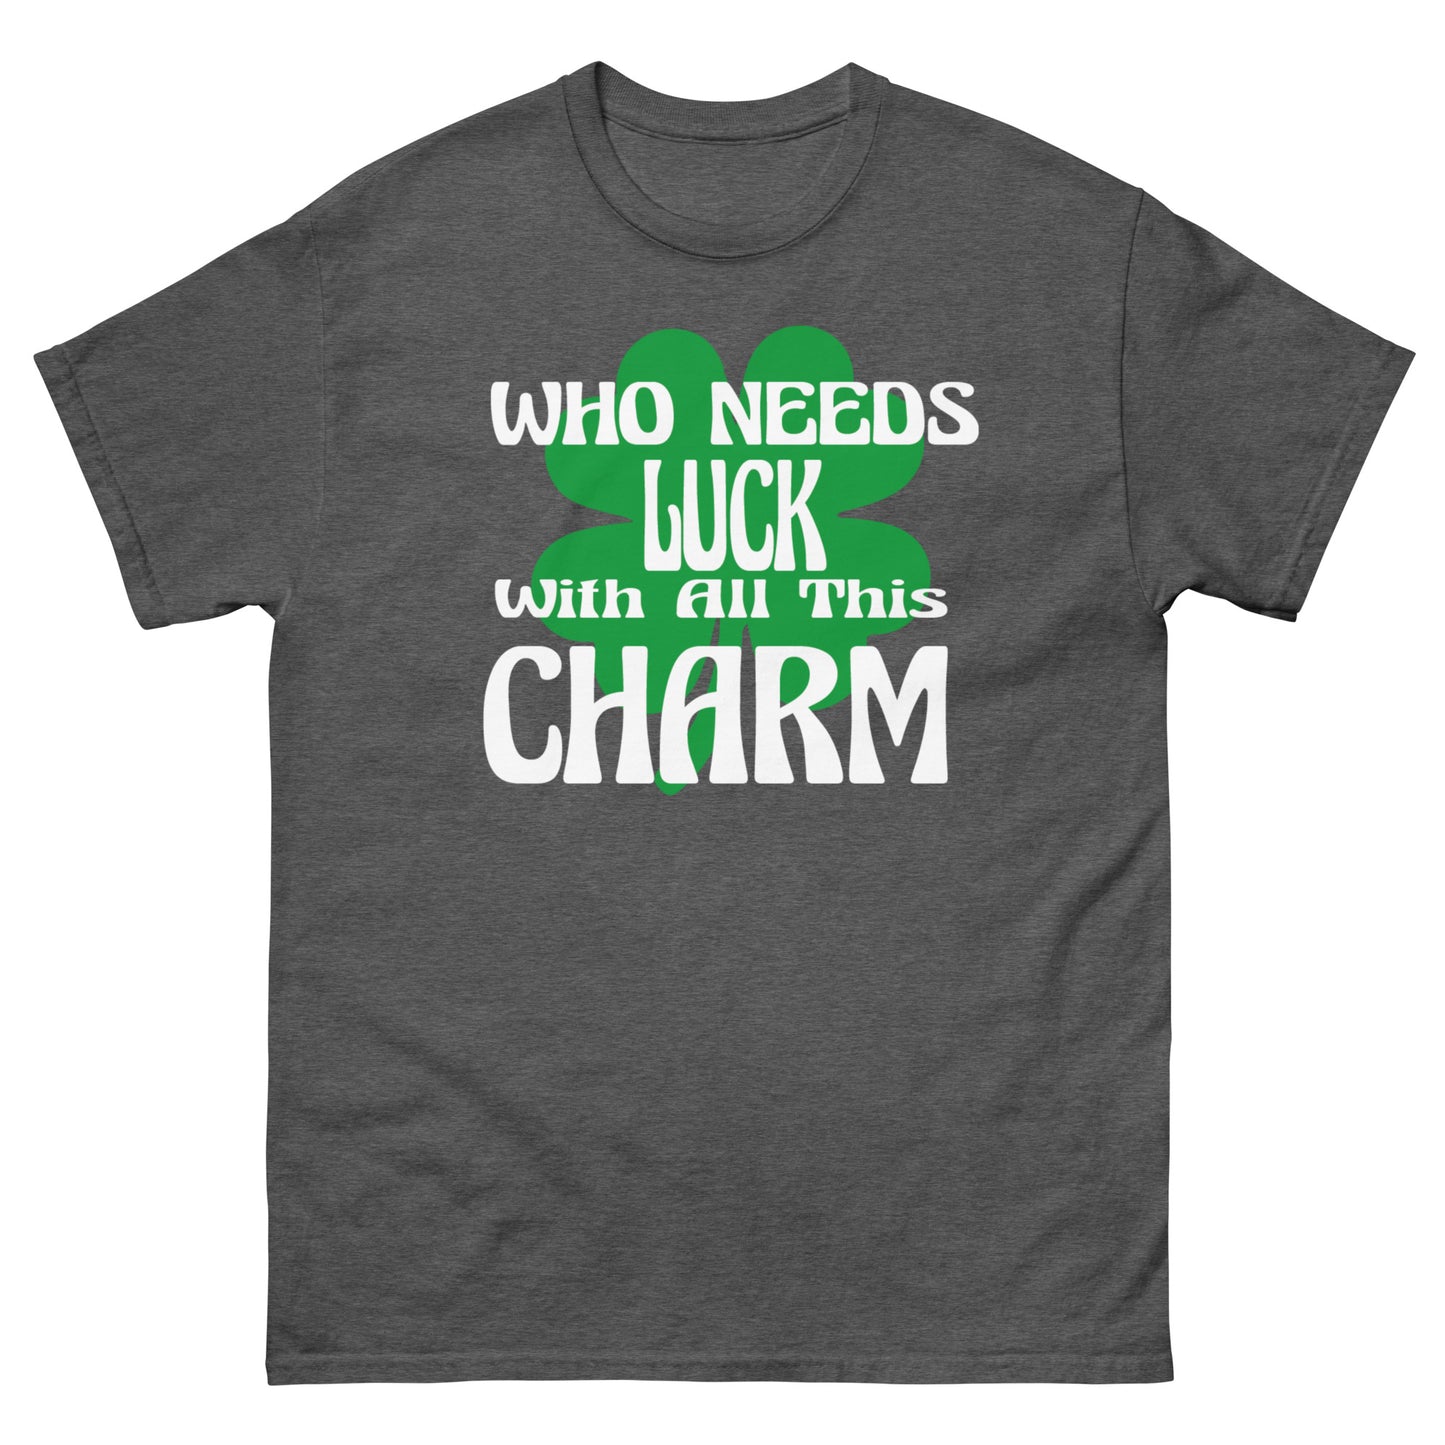 With all this luck who needs charm-St. Patrick's Day T-Shirt